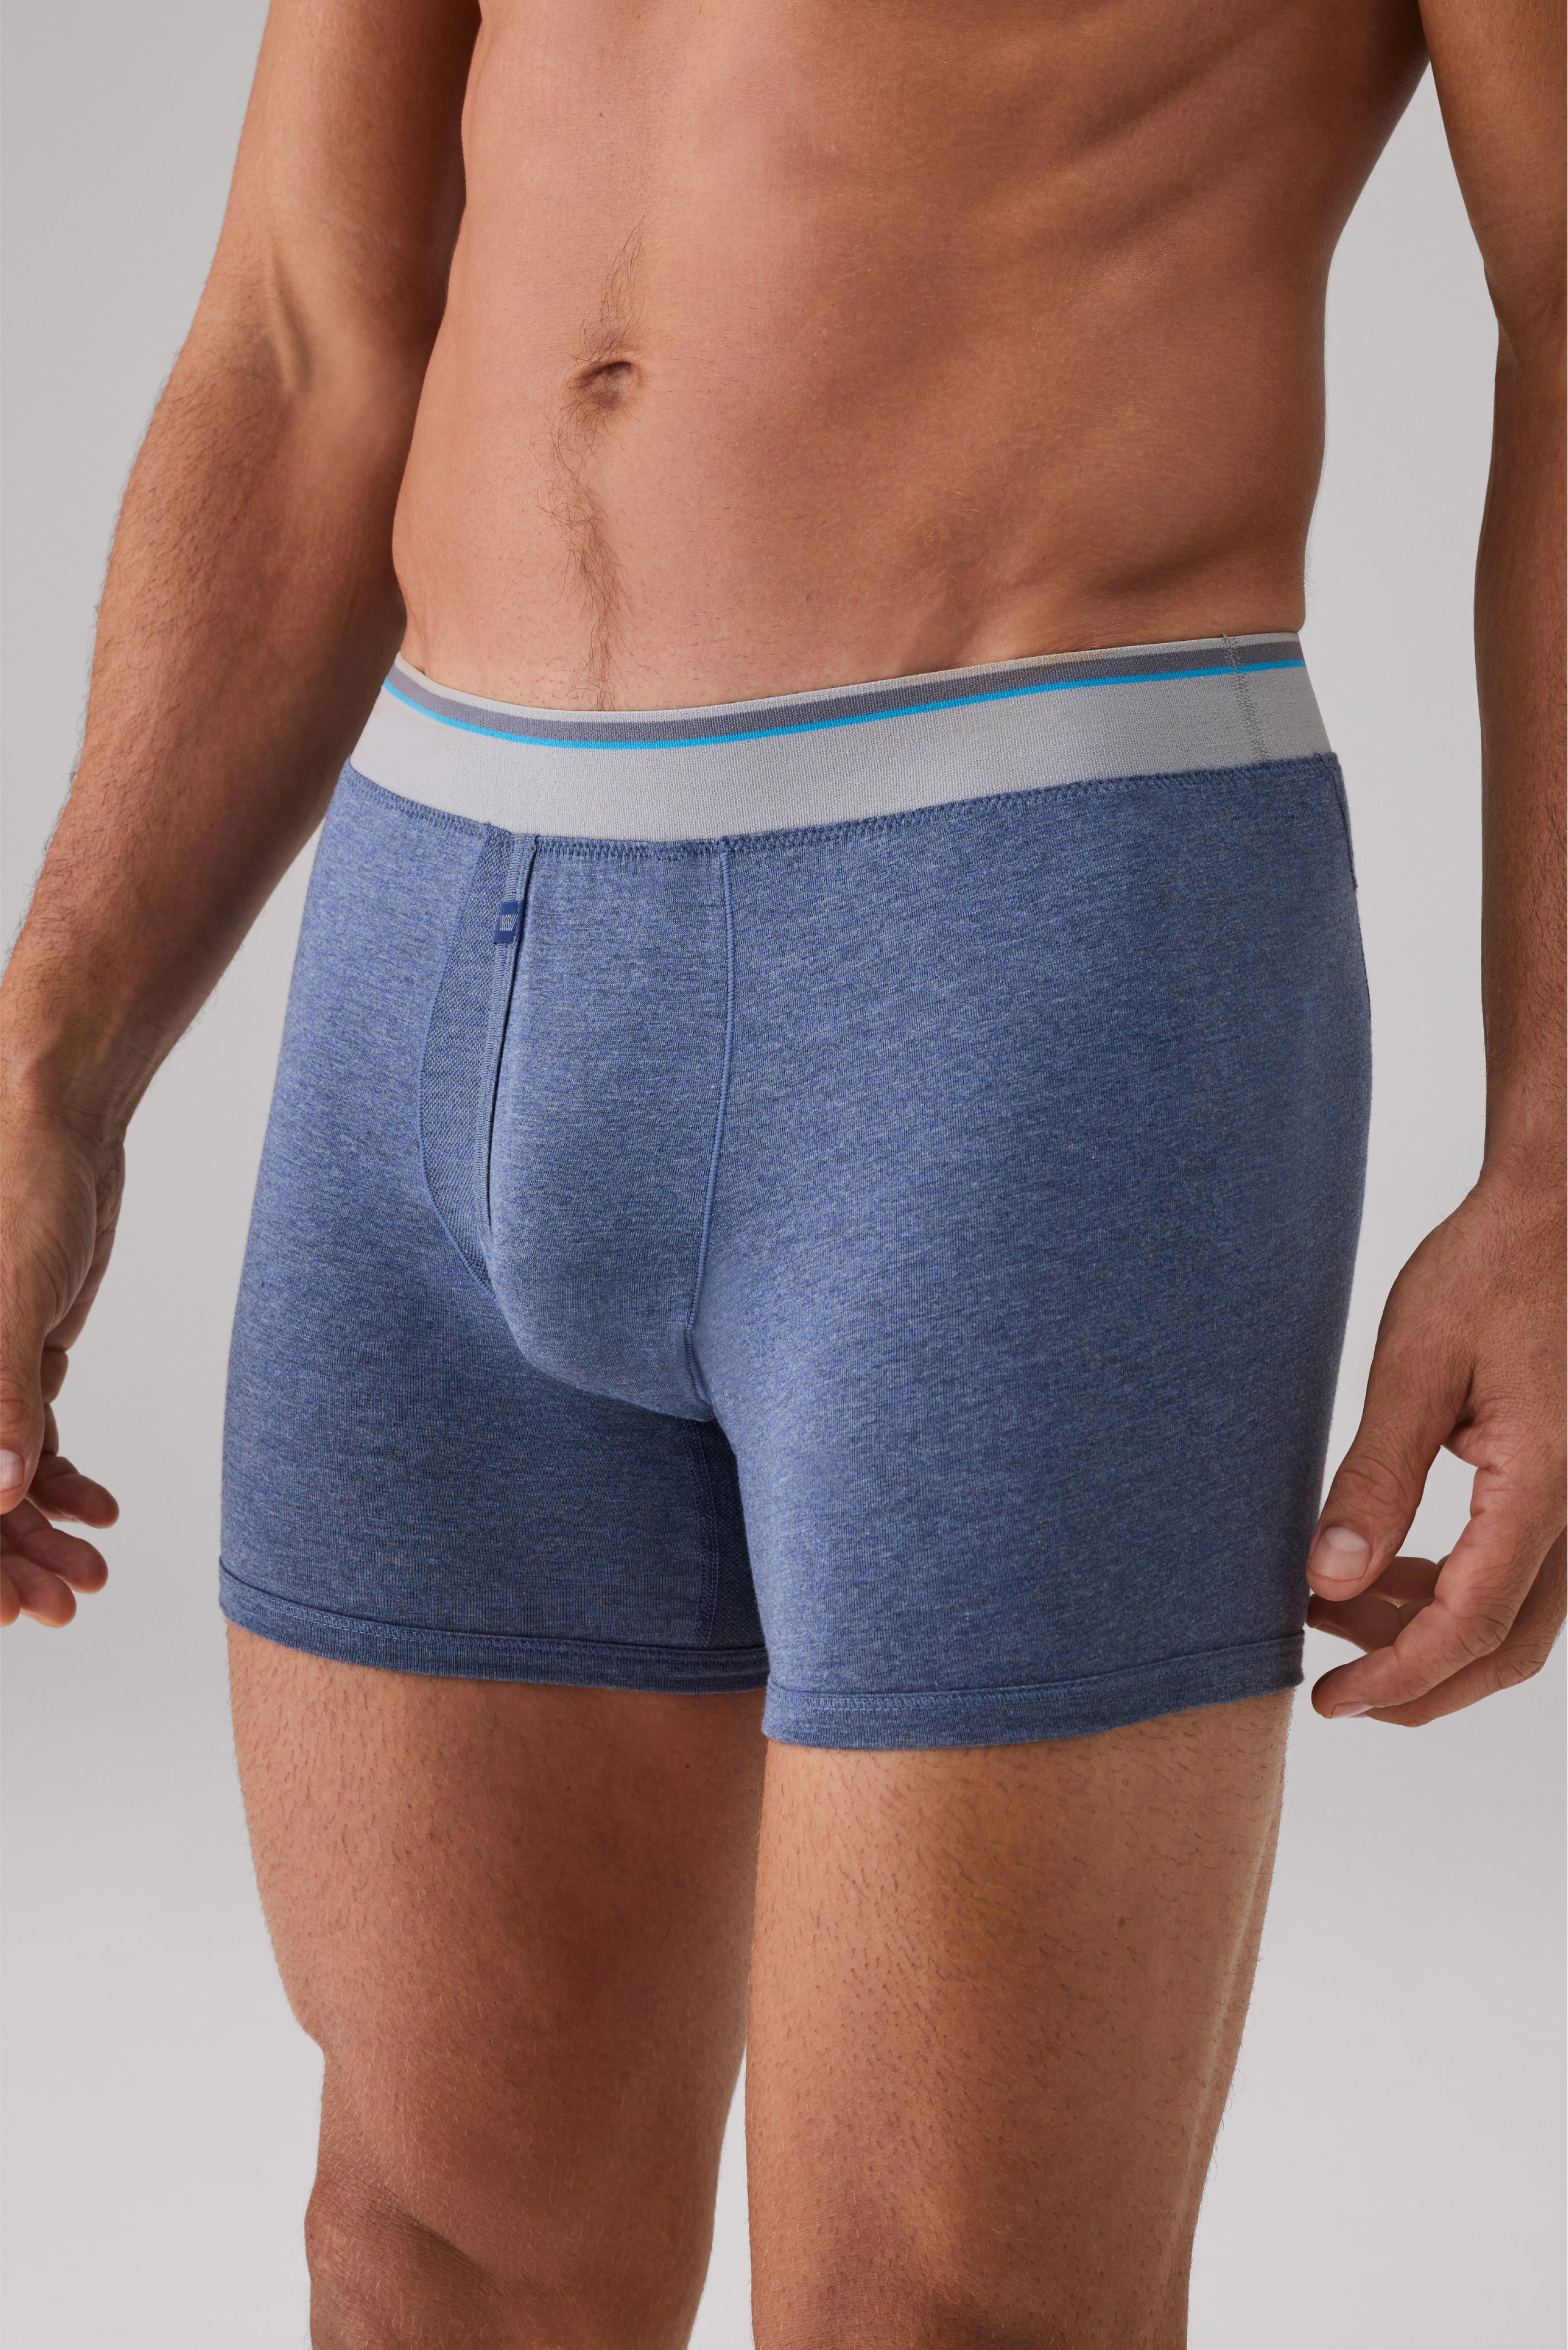 Mack Weldon After-Christmas Sale 2022: Save up to 34% Off Underwear